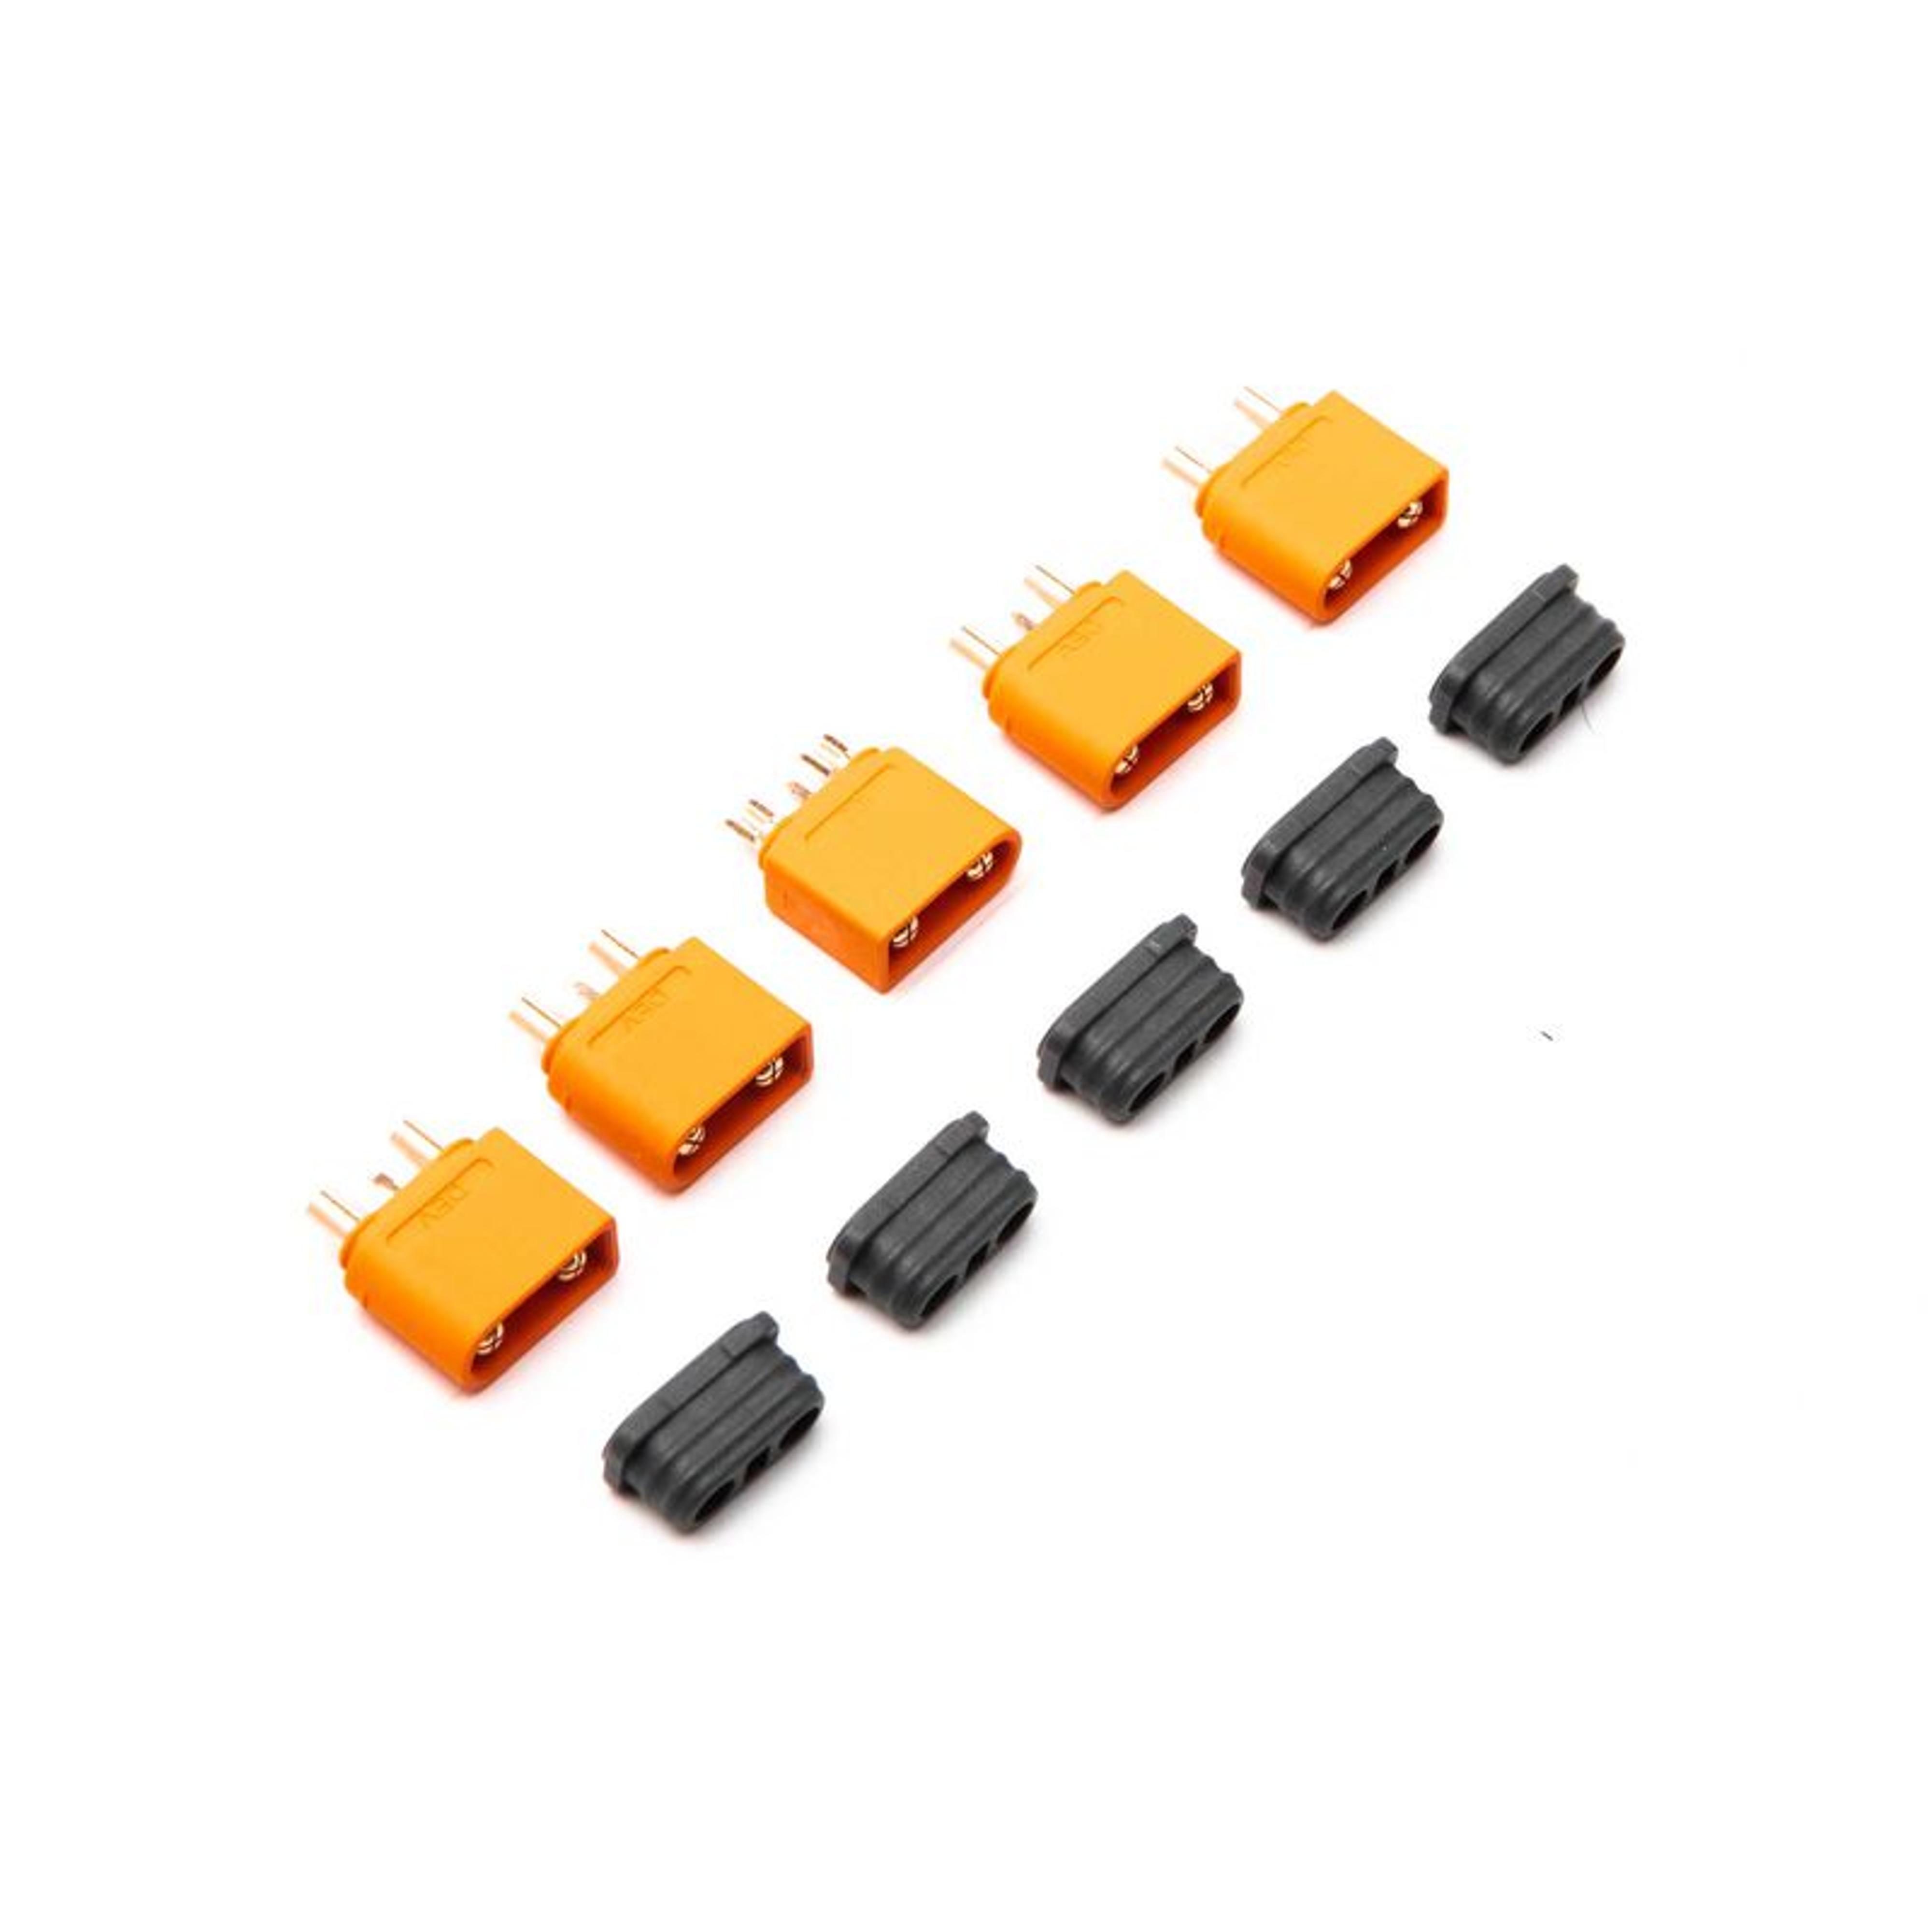 IC2 Device Connectors (Set of 5)